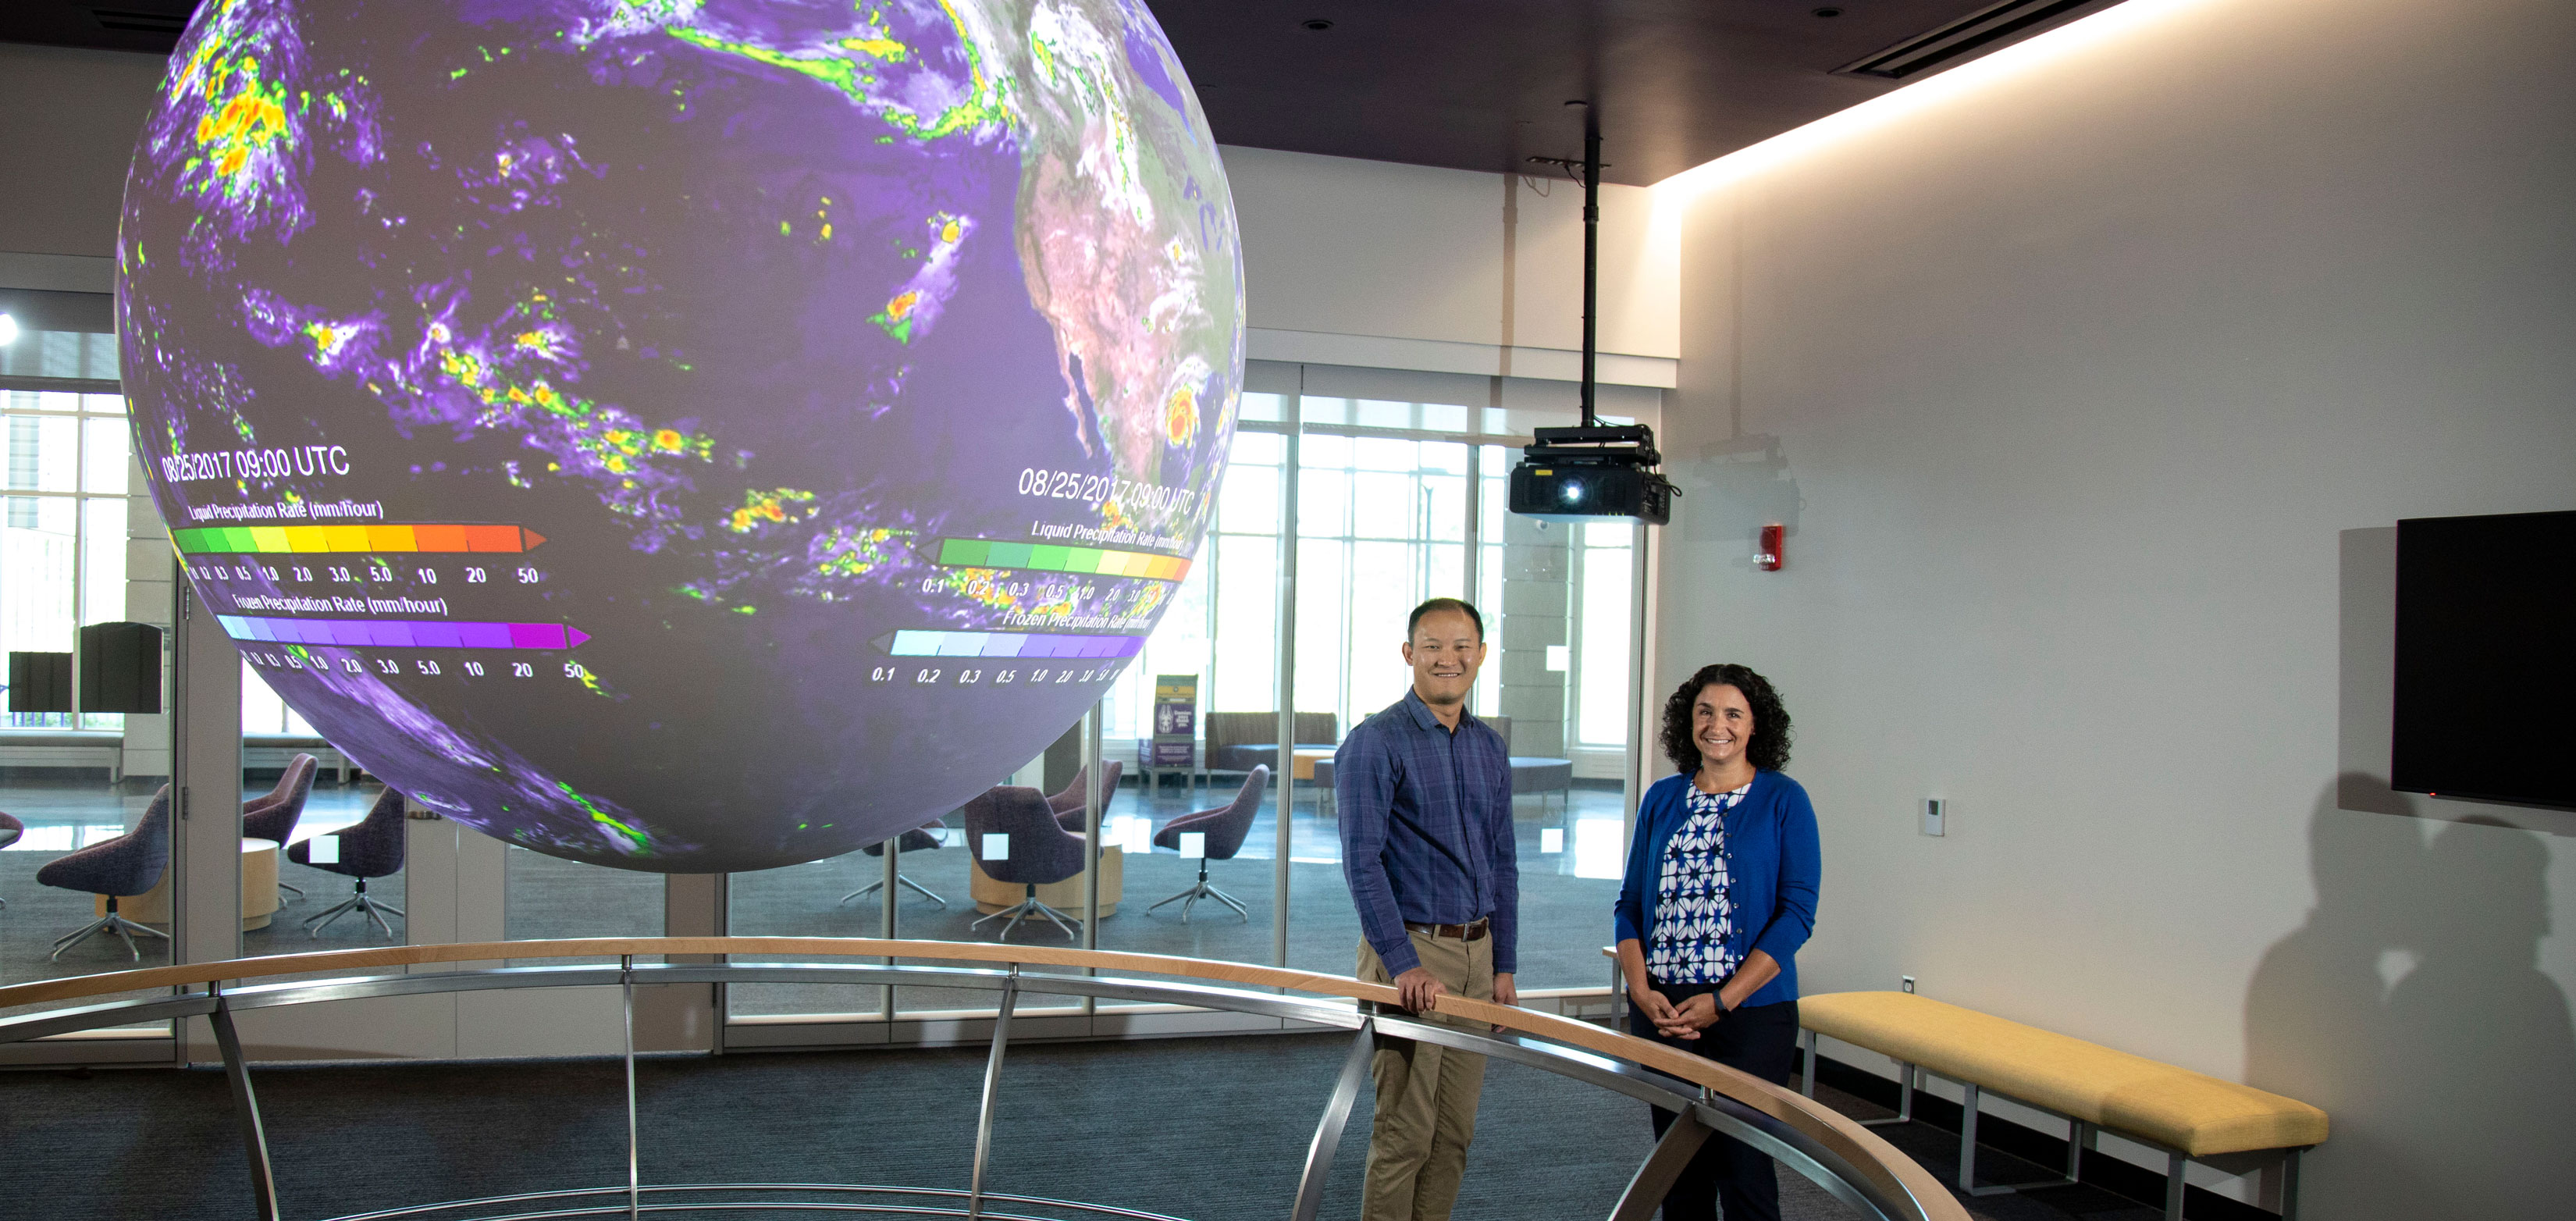 A man and a woman stand and smile for a camera in front of a huge digital globe showing live weather patterns.